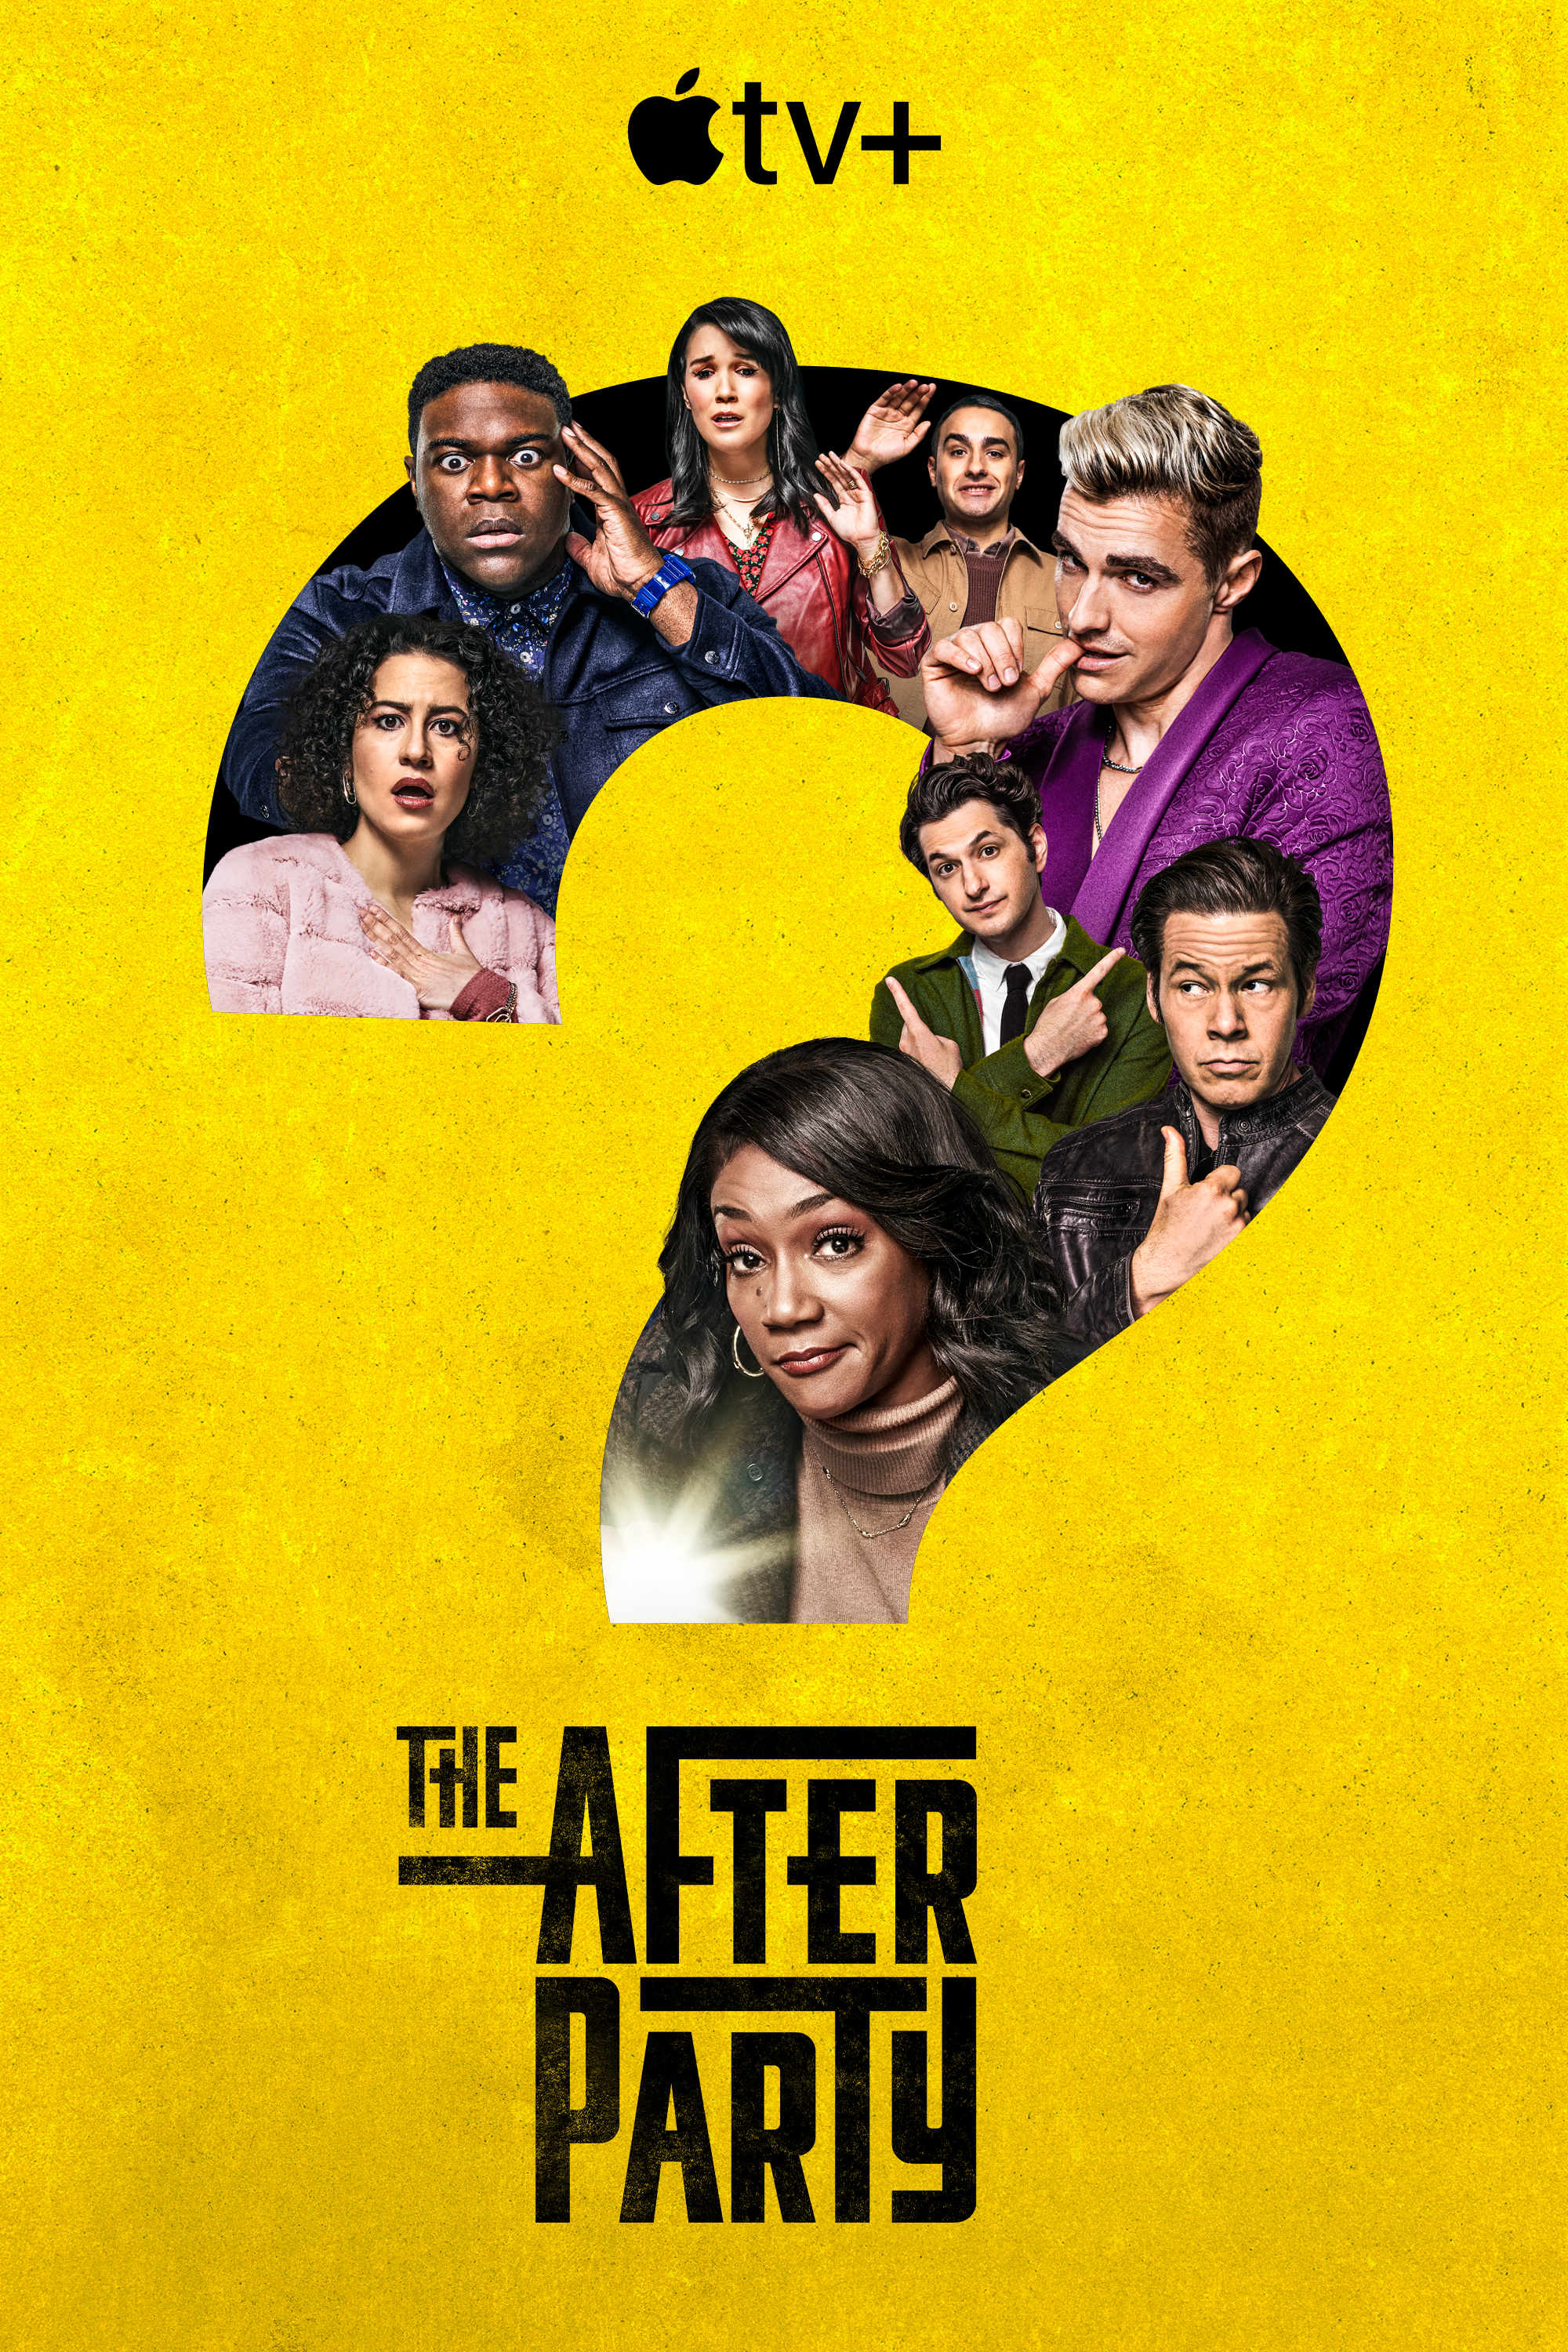 The Afterparty Season 2 Ending Explained: Edgar's Killer Identity & Those  Wild Cameos